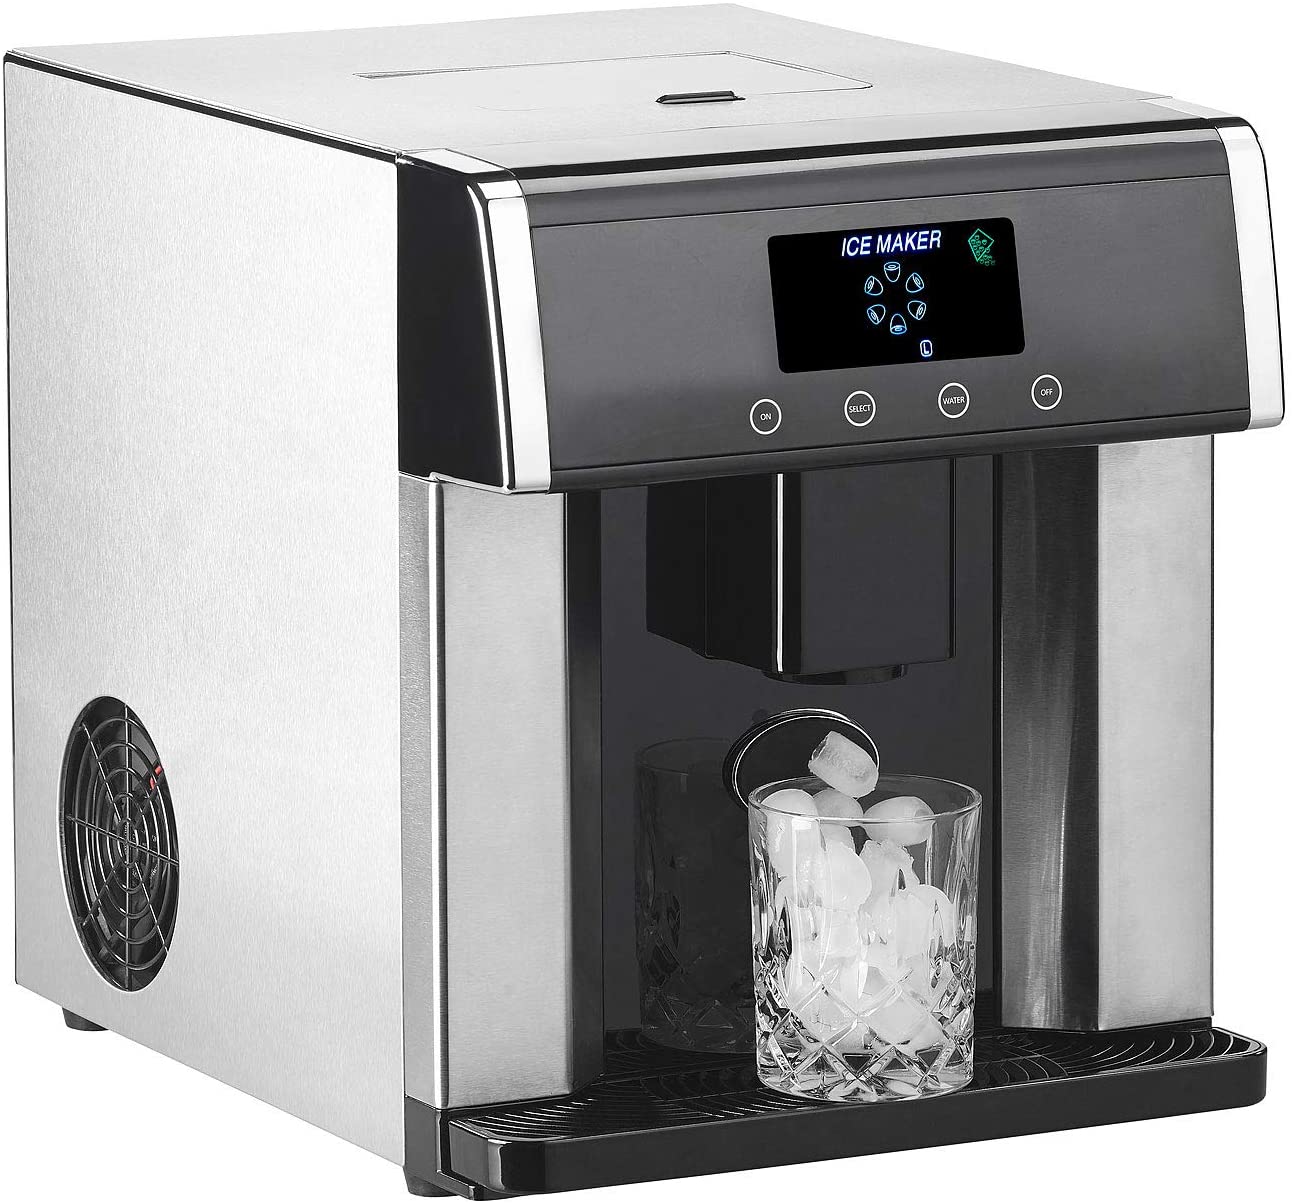 Rosenstein & Söhne Ice cube maker: Ice Cube Machine & Water Dispenser V2 with XL Display, Stainless Steel Housing